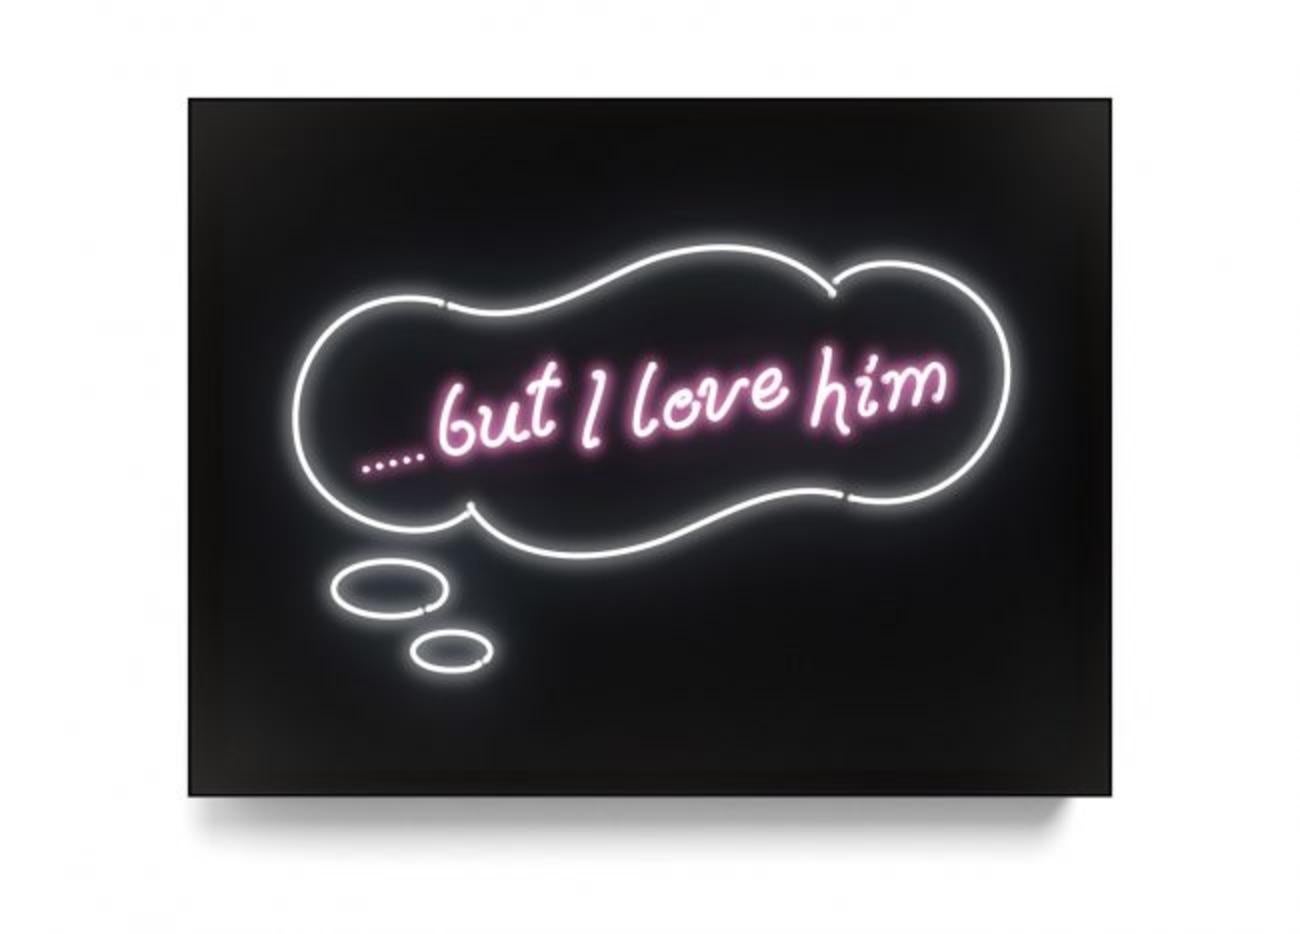 Series: Neon
40.5" x 53.5" x 6" - Edition of 9

Disarmingly blunt and intensely intimate, David Drebin's neon light installations illuminate hidden aspirations and secret thoughts of the femmes fatales who inhabit the elusive world of his iconic